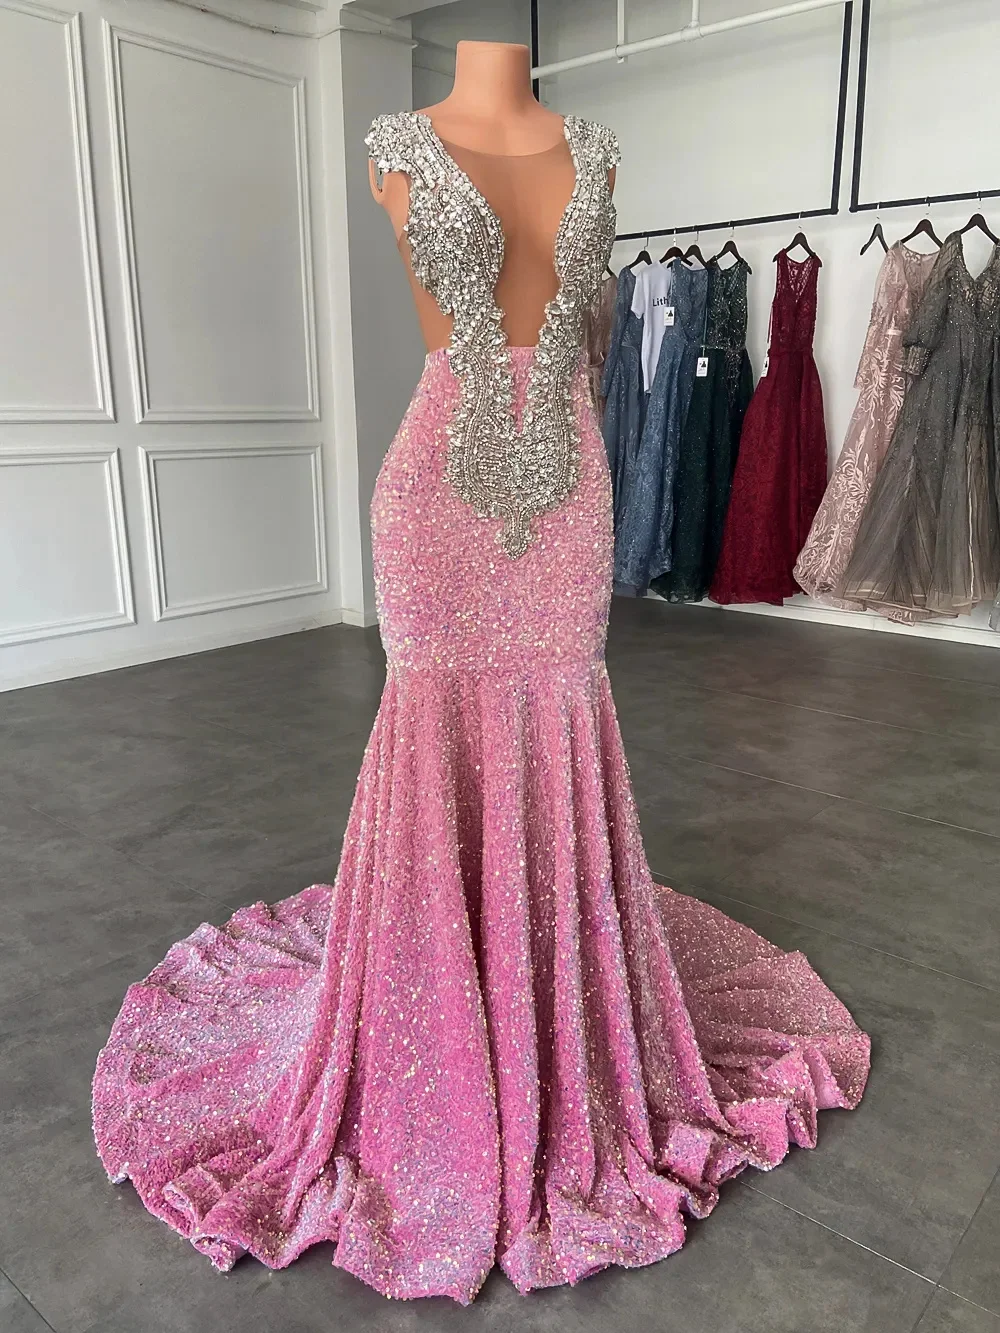 

Luxury Long Prom Dresses Sexy Mermaid Sparkly Pink Sequin Black Girls Crystals Evening Formal Gala Party Gowns Robe De Soiree Ve